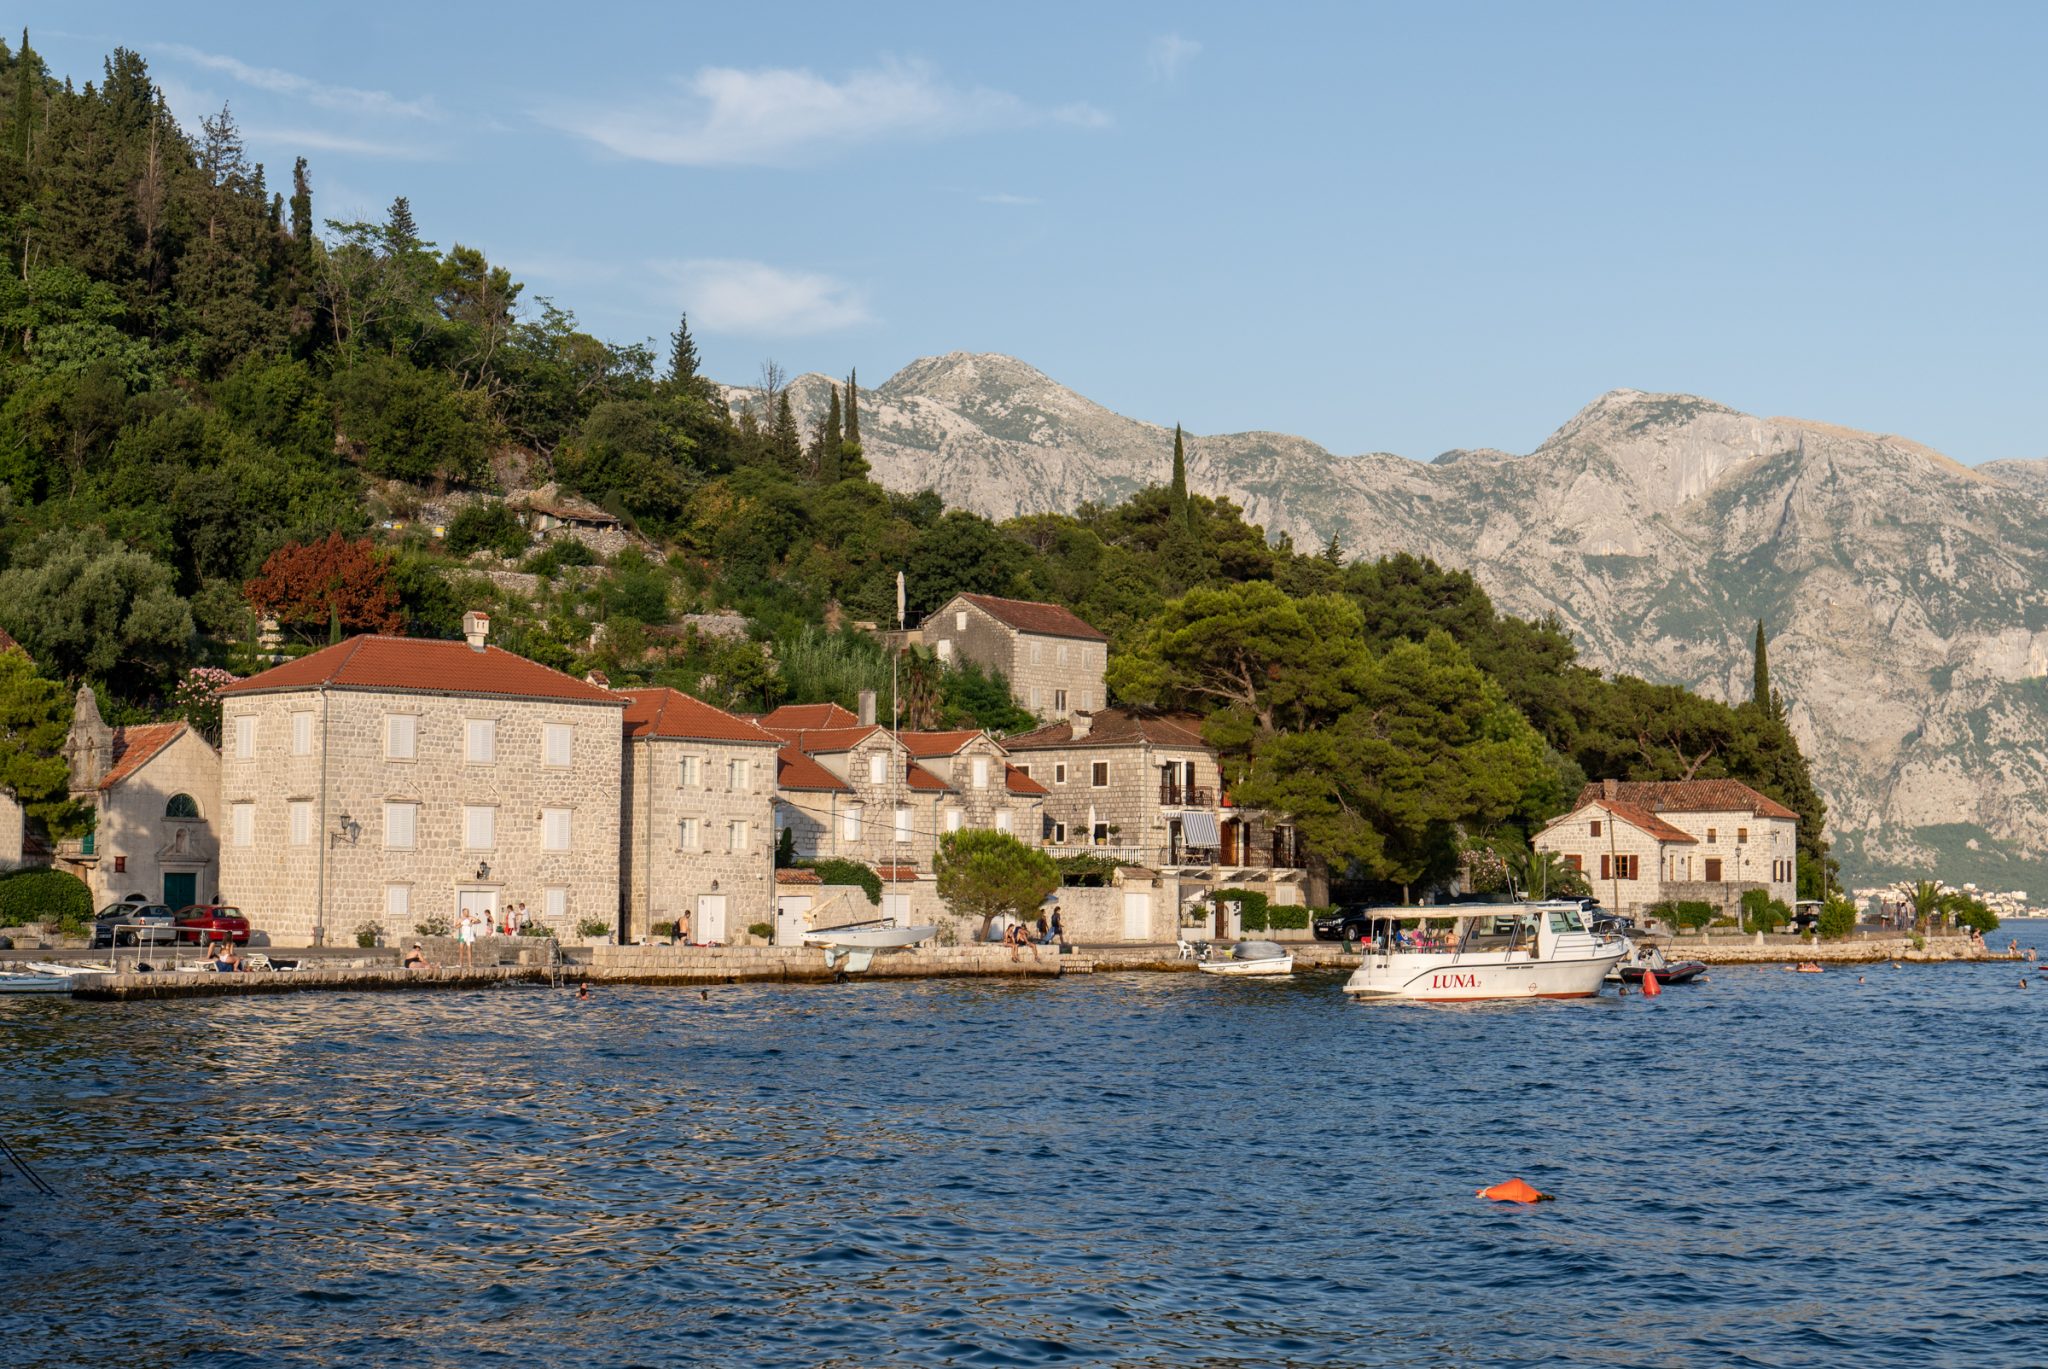 A tiny village of stone houses with orange roofs set against a forested hillside on the Bay of Kotor.